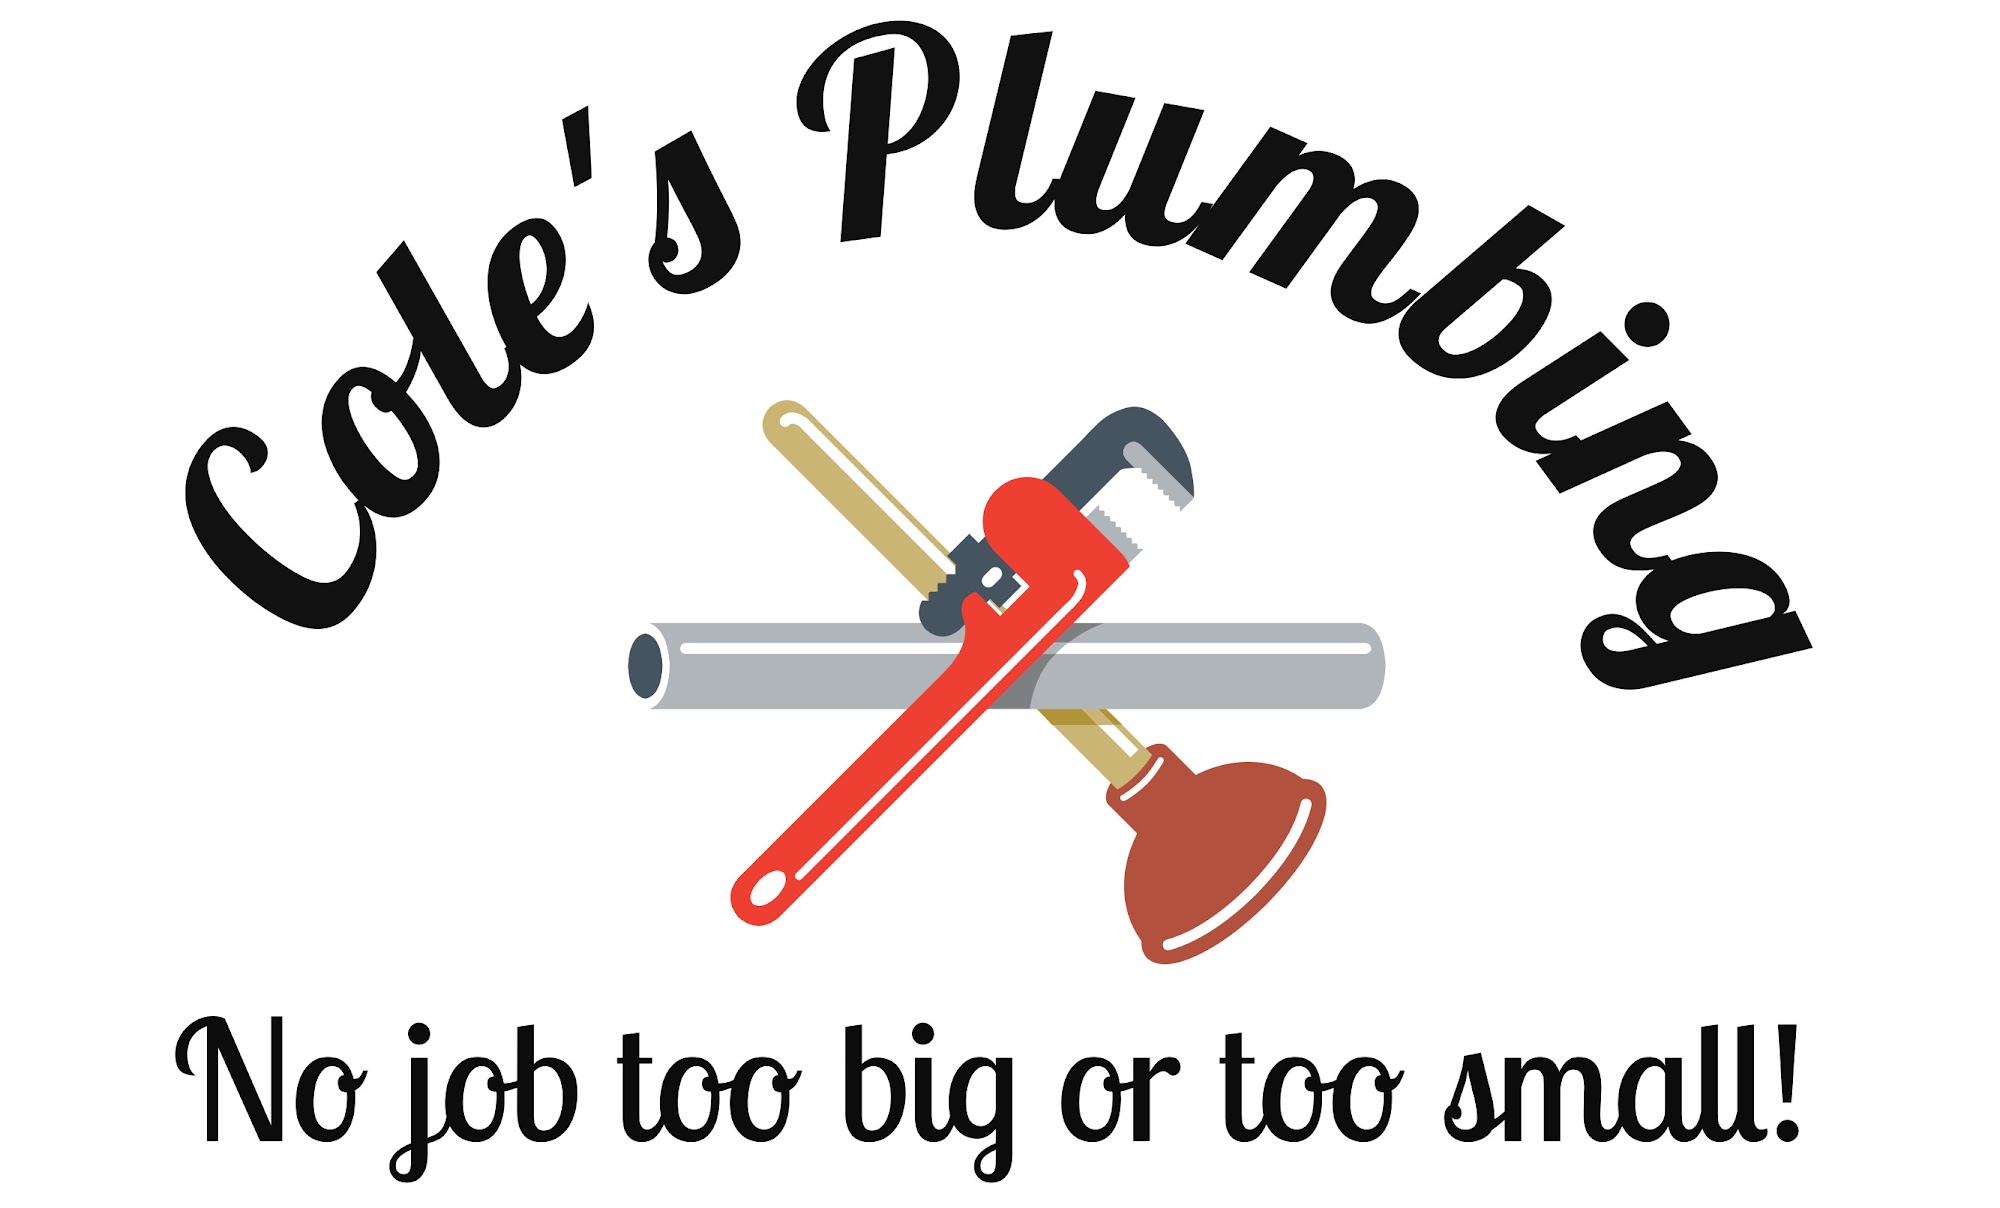 Cole's Plumbing 9028 Ladner St, Bay St Louis Mississippi 39520